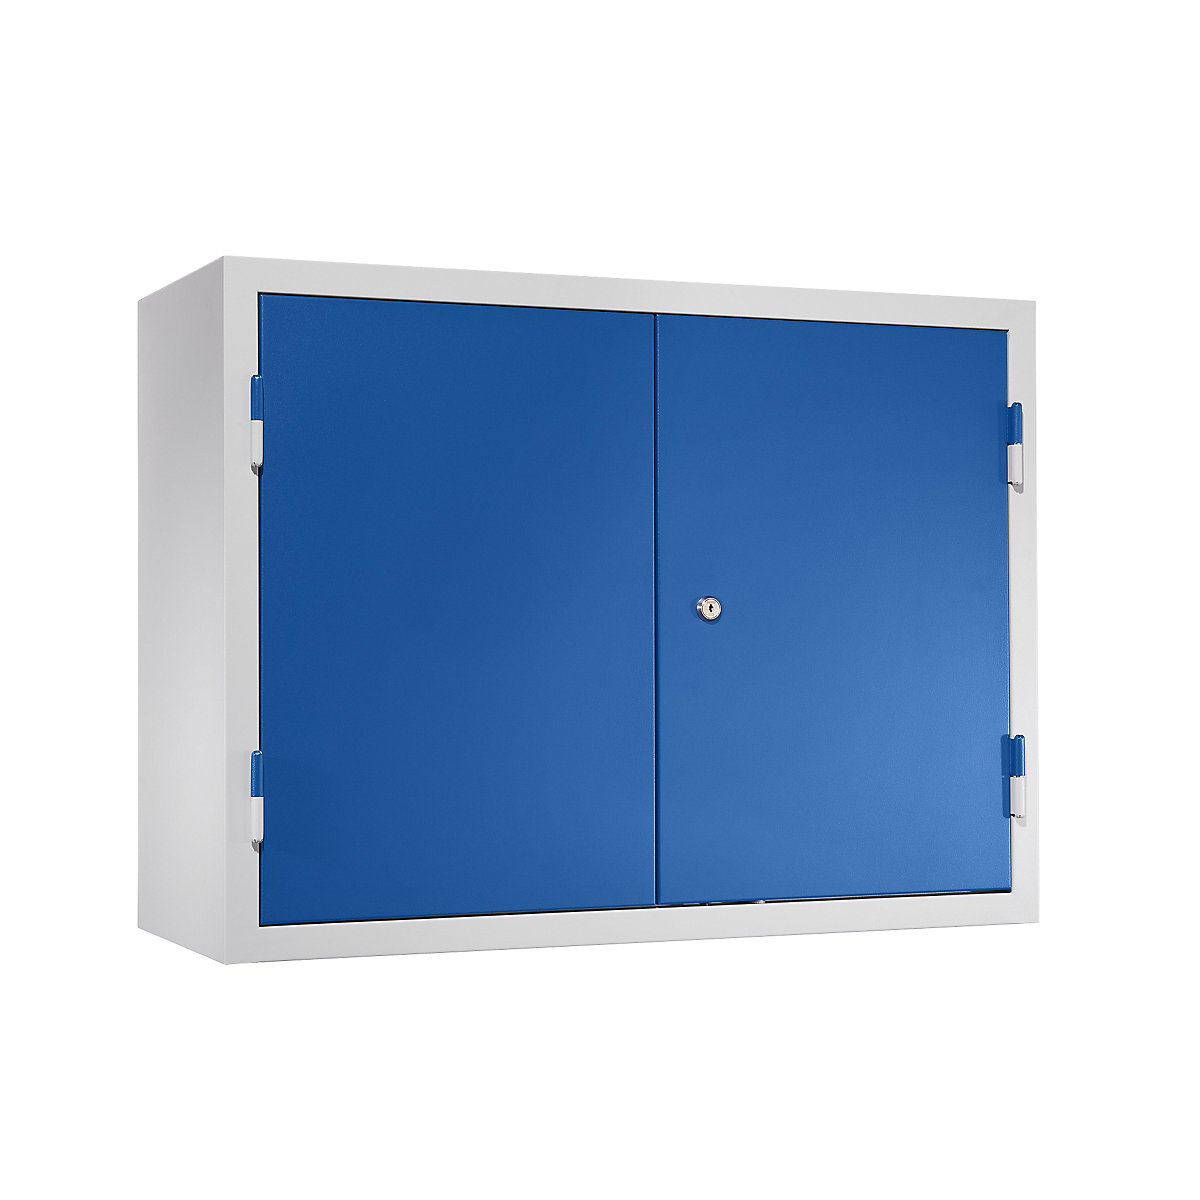 Wall mounted cupboard for the workshop – eurokraft basic